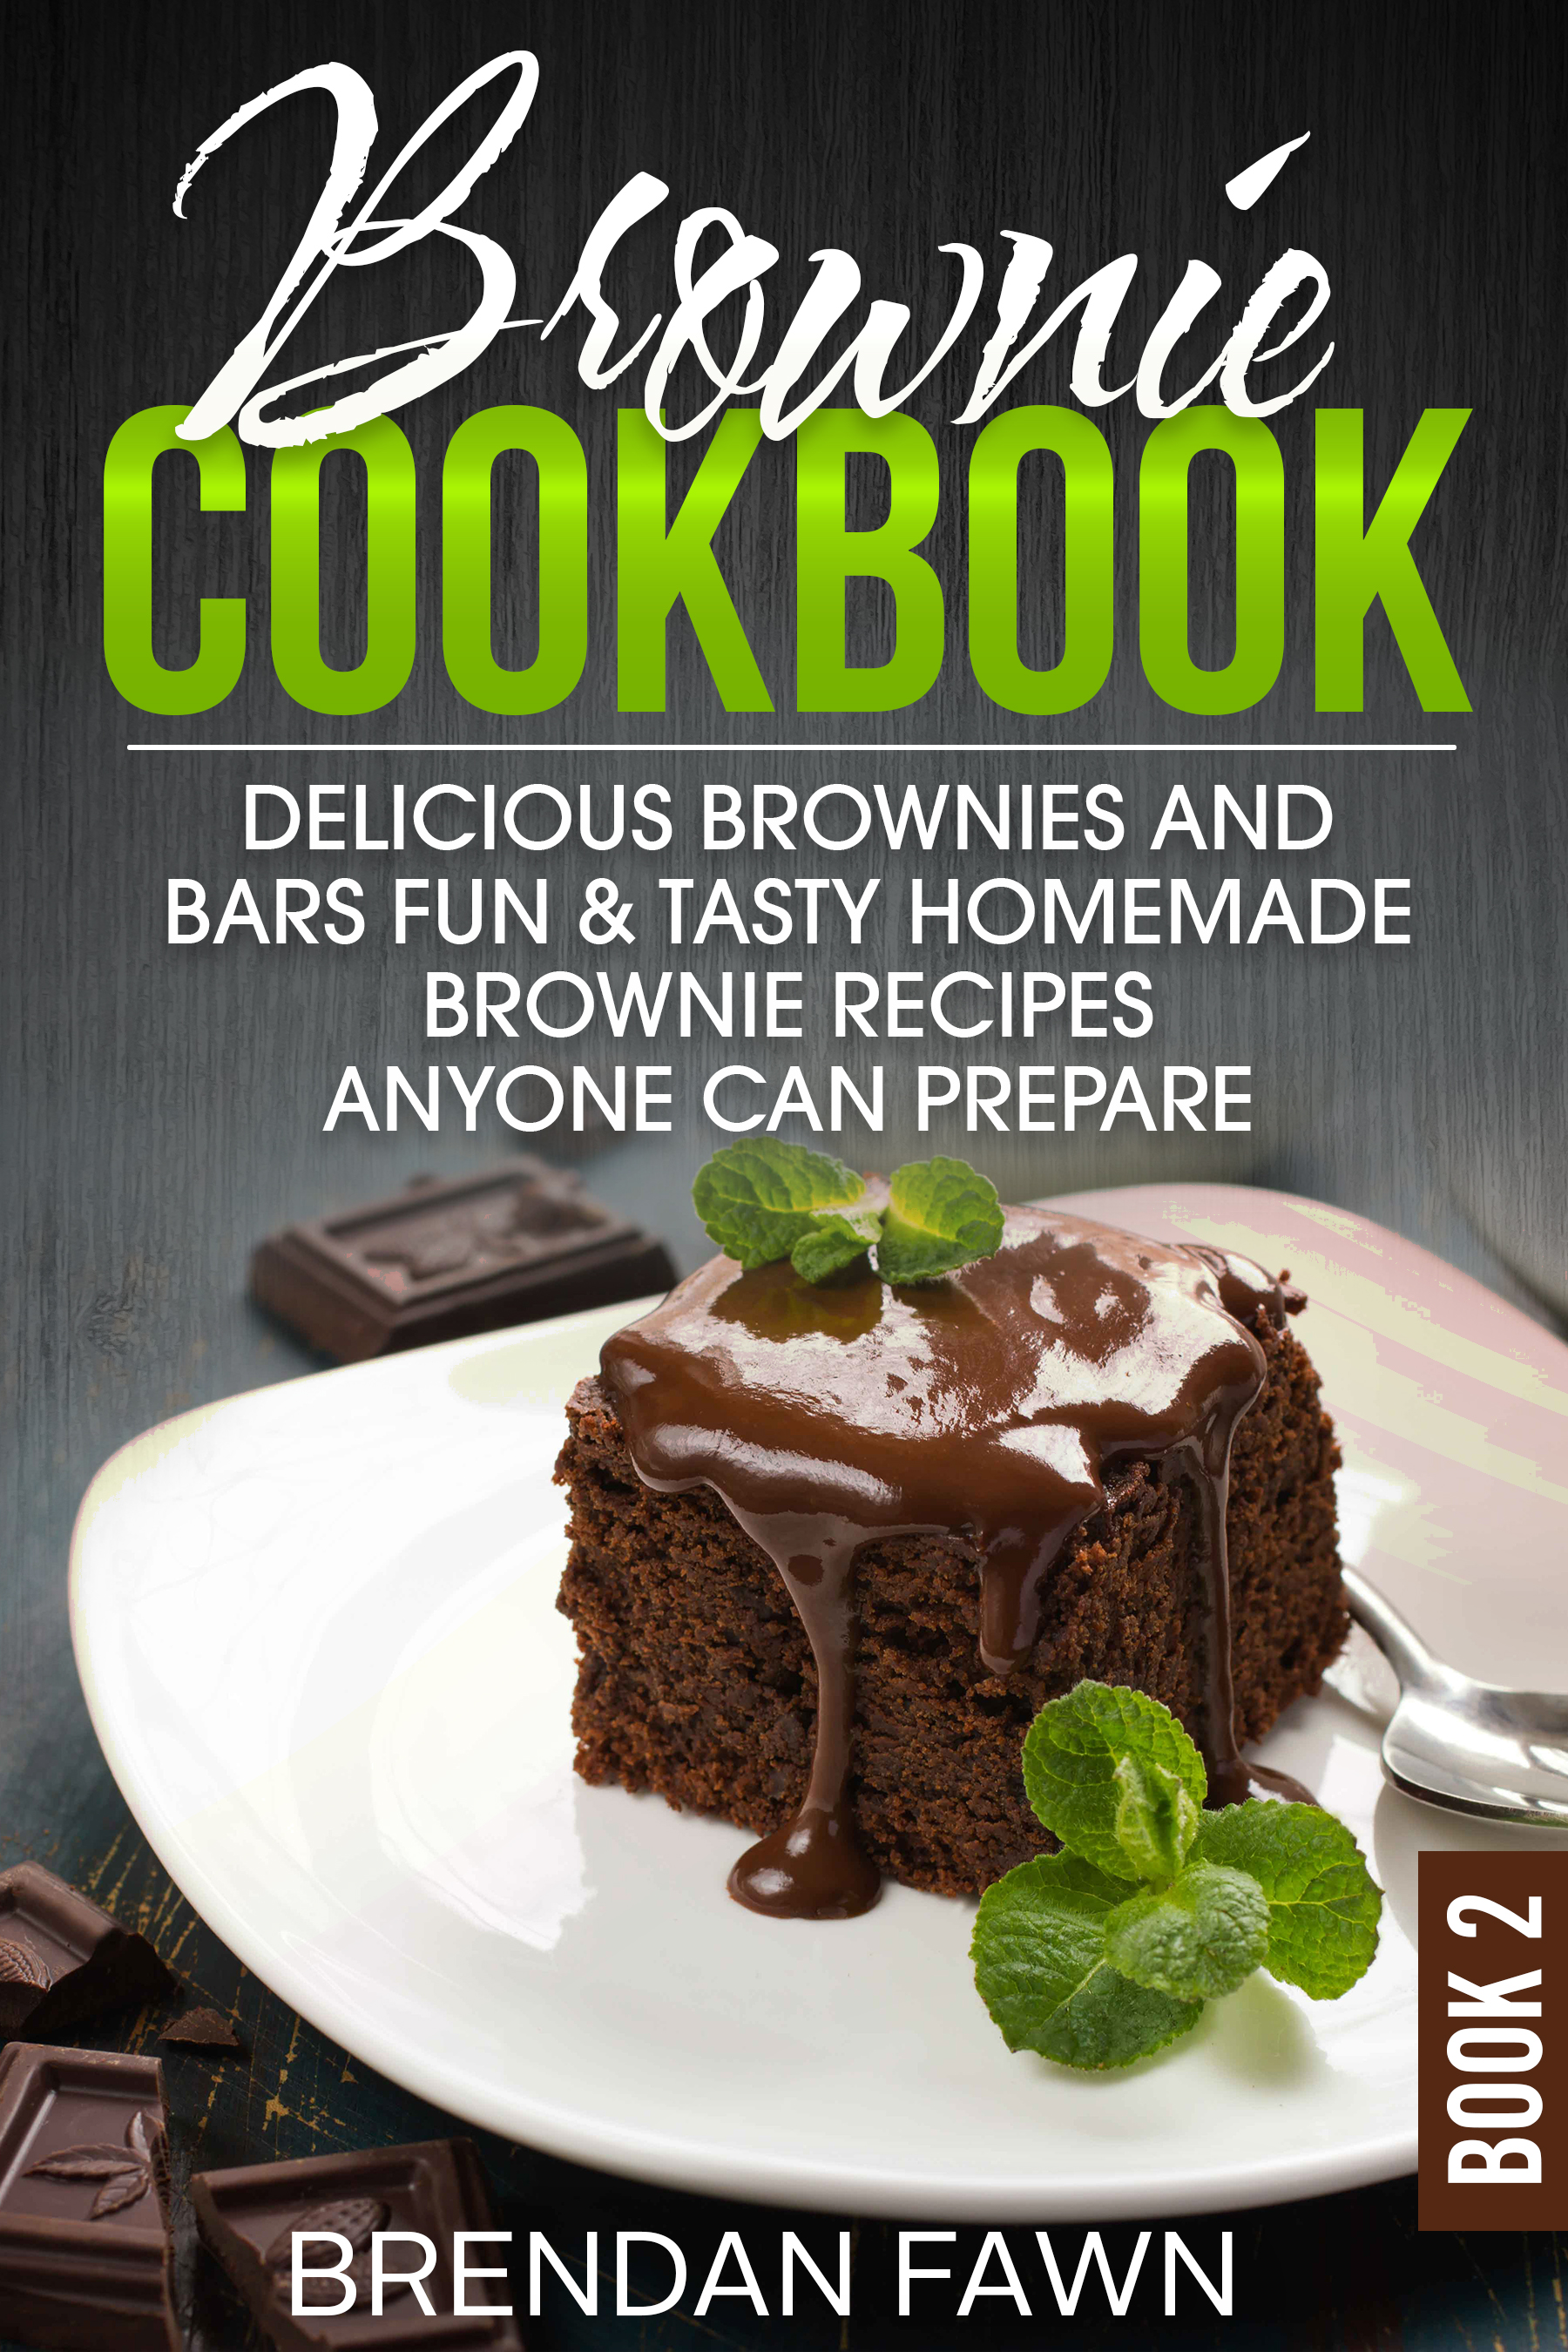 FREE: Brownie Cookbook: Delicious Brownies and Bars: Fun & Tasty Homemade Brownie Recipes Anyone Can Prepare by Brendan Fawn